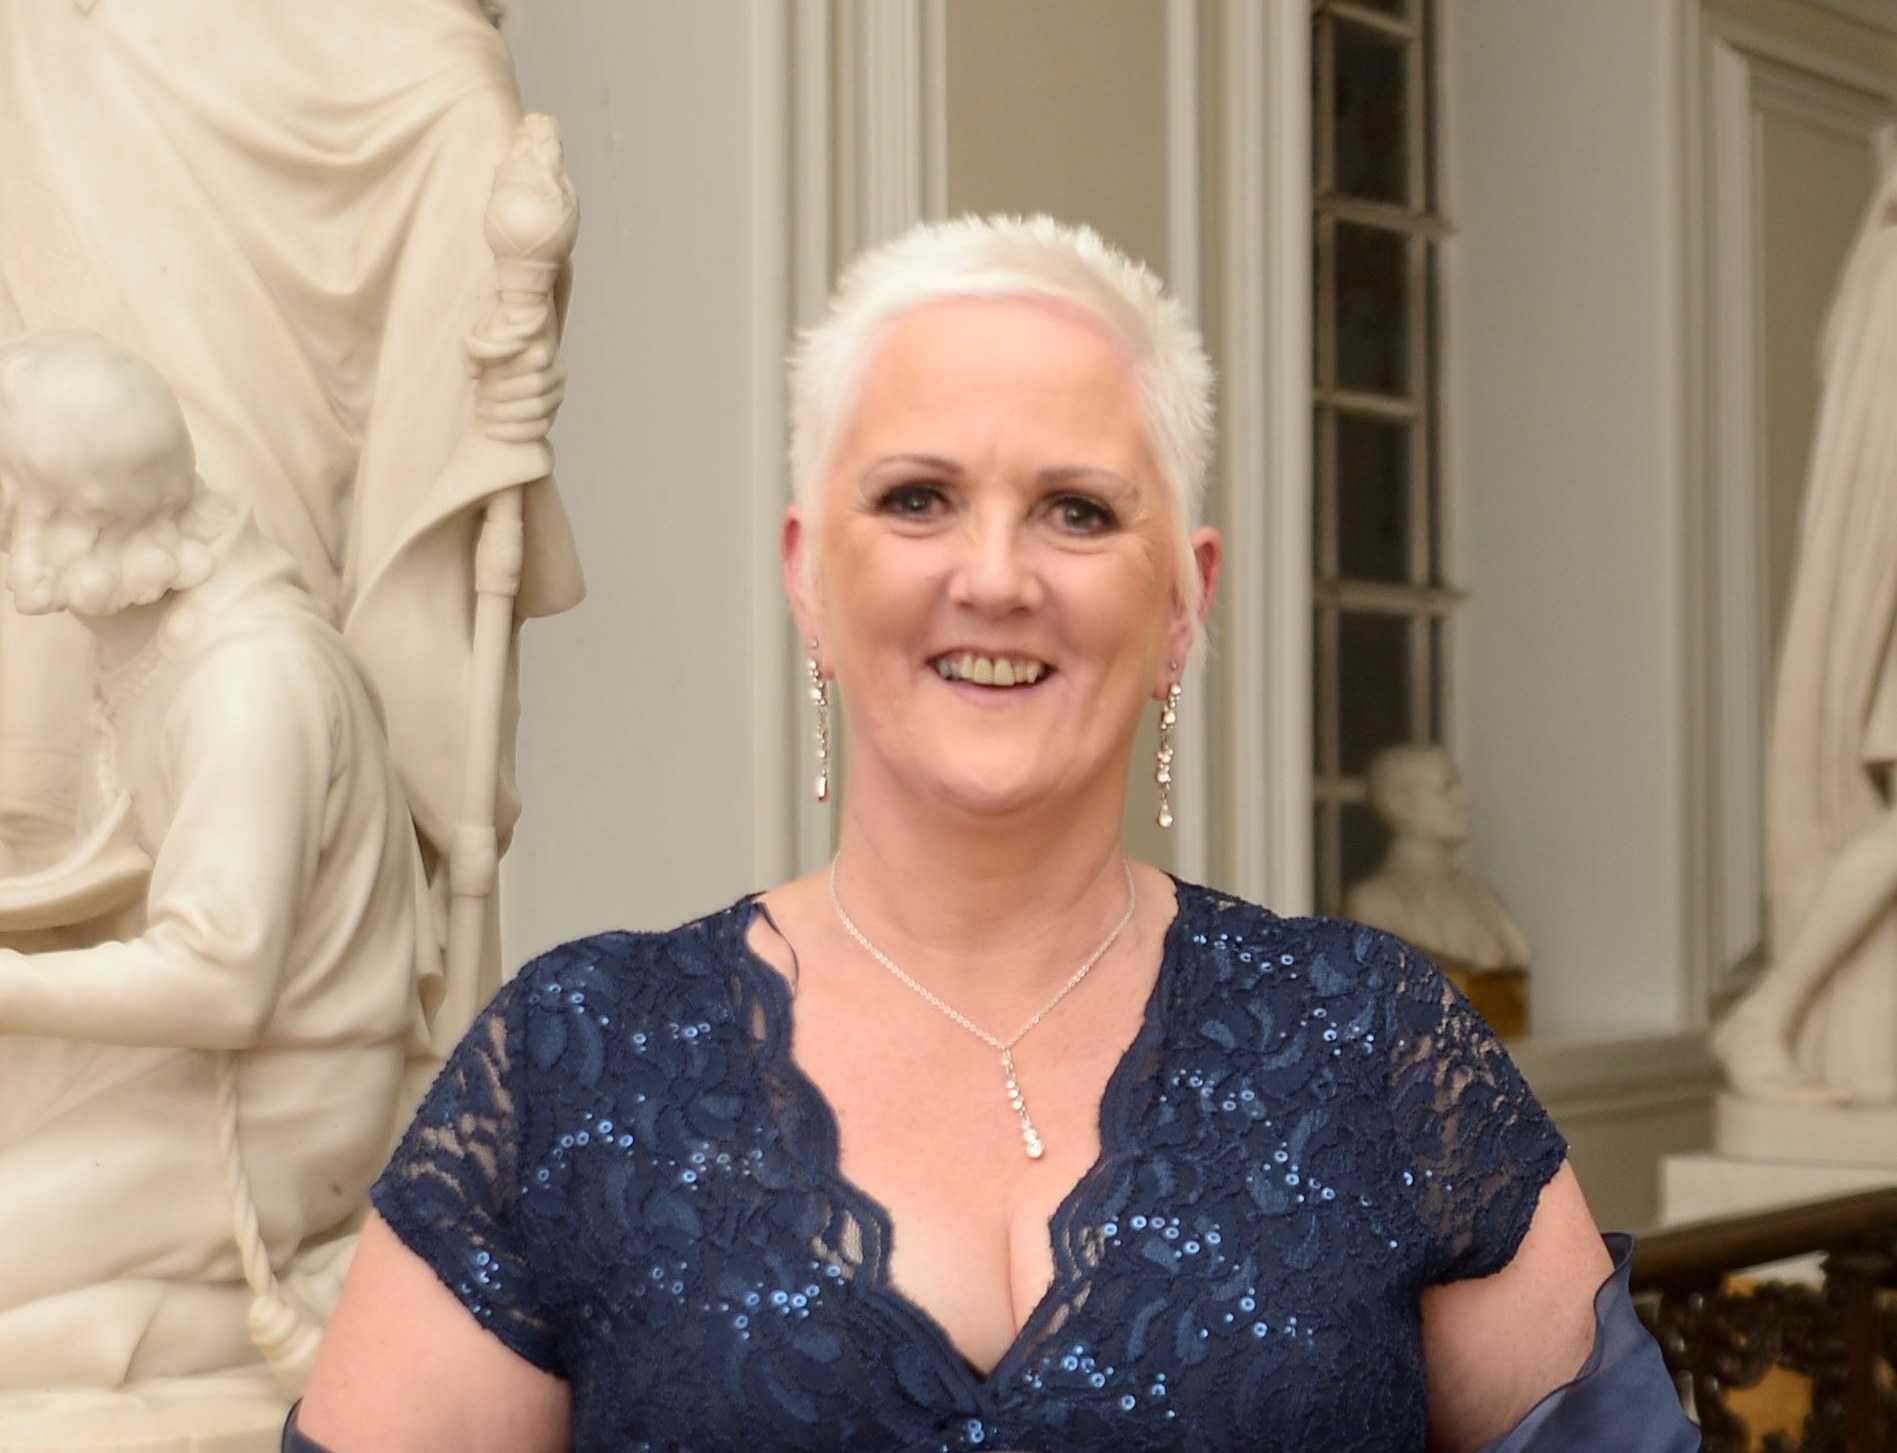 Dedicated night-shift care worker hits gold standard in prestigious awards